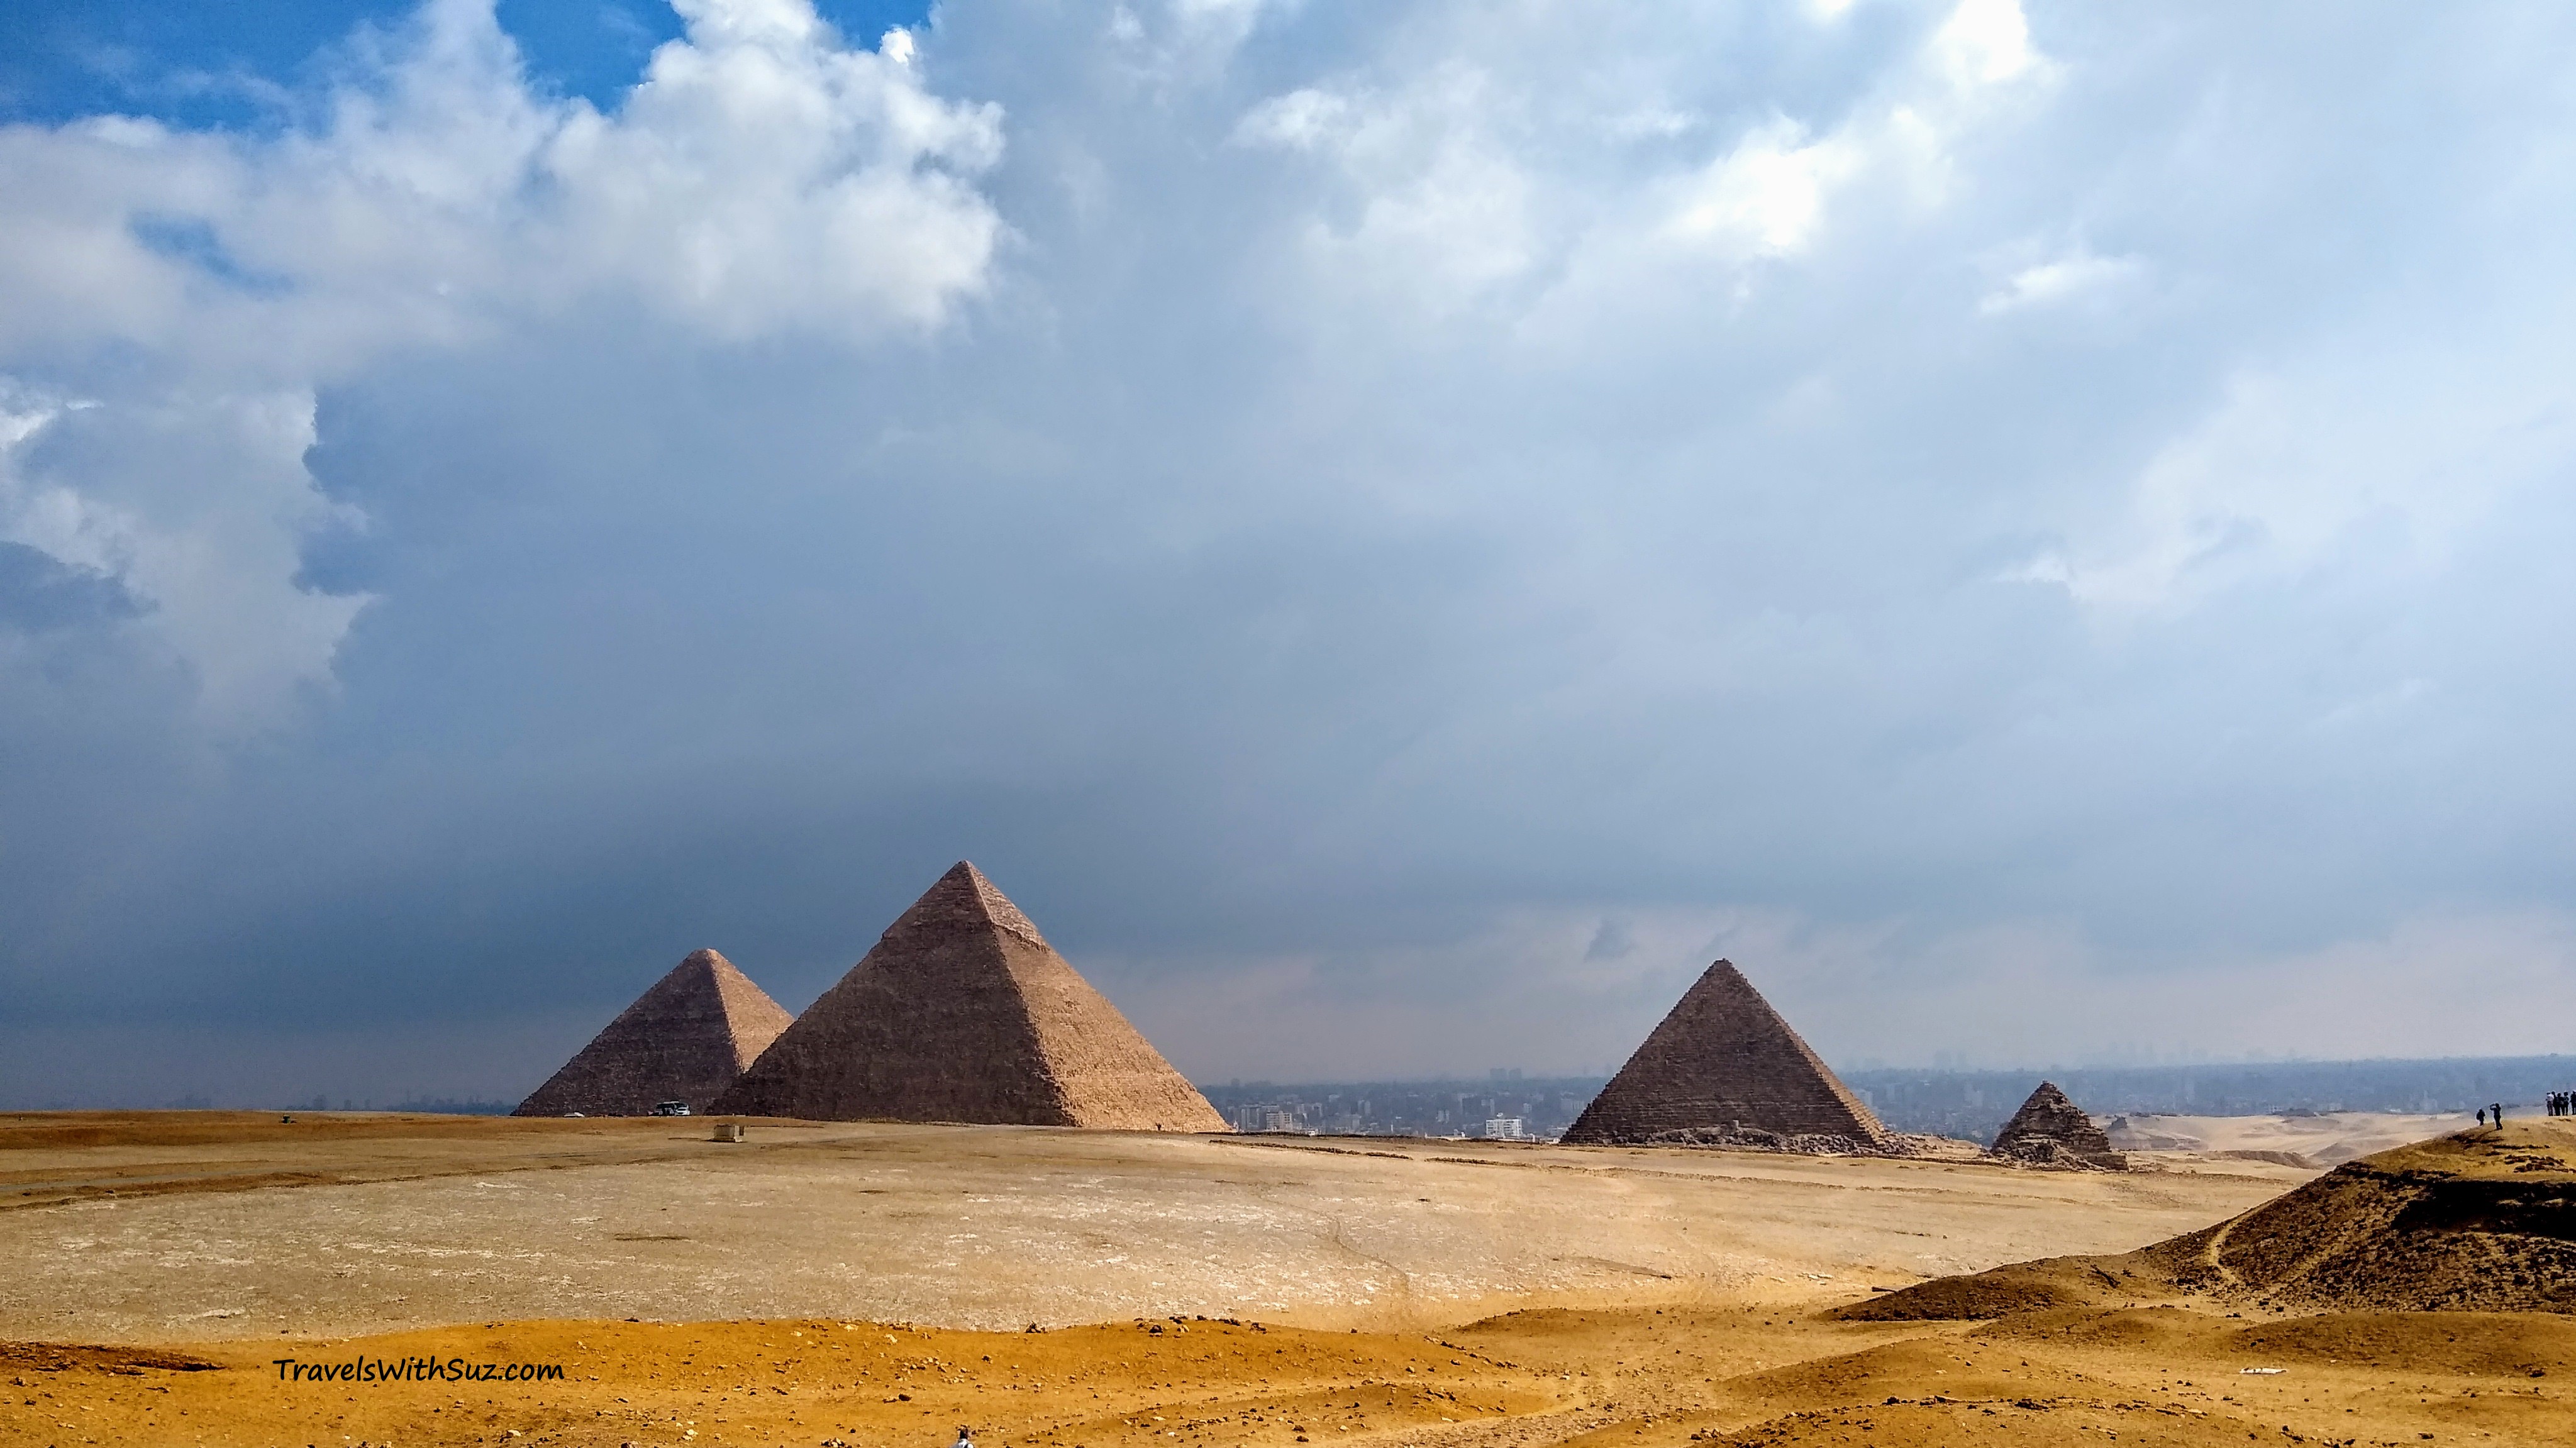 Pyramids on the Giza Plateau in Egypt